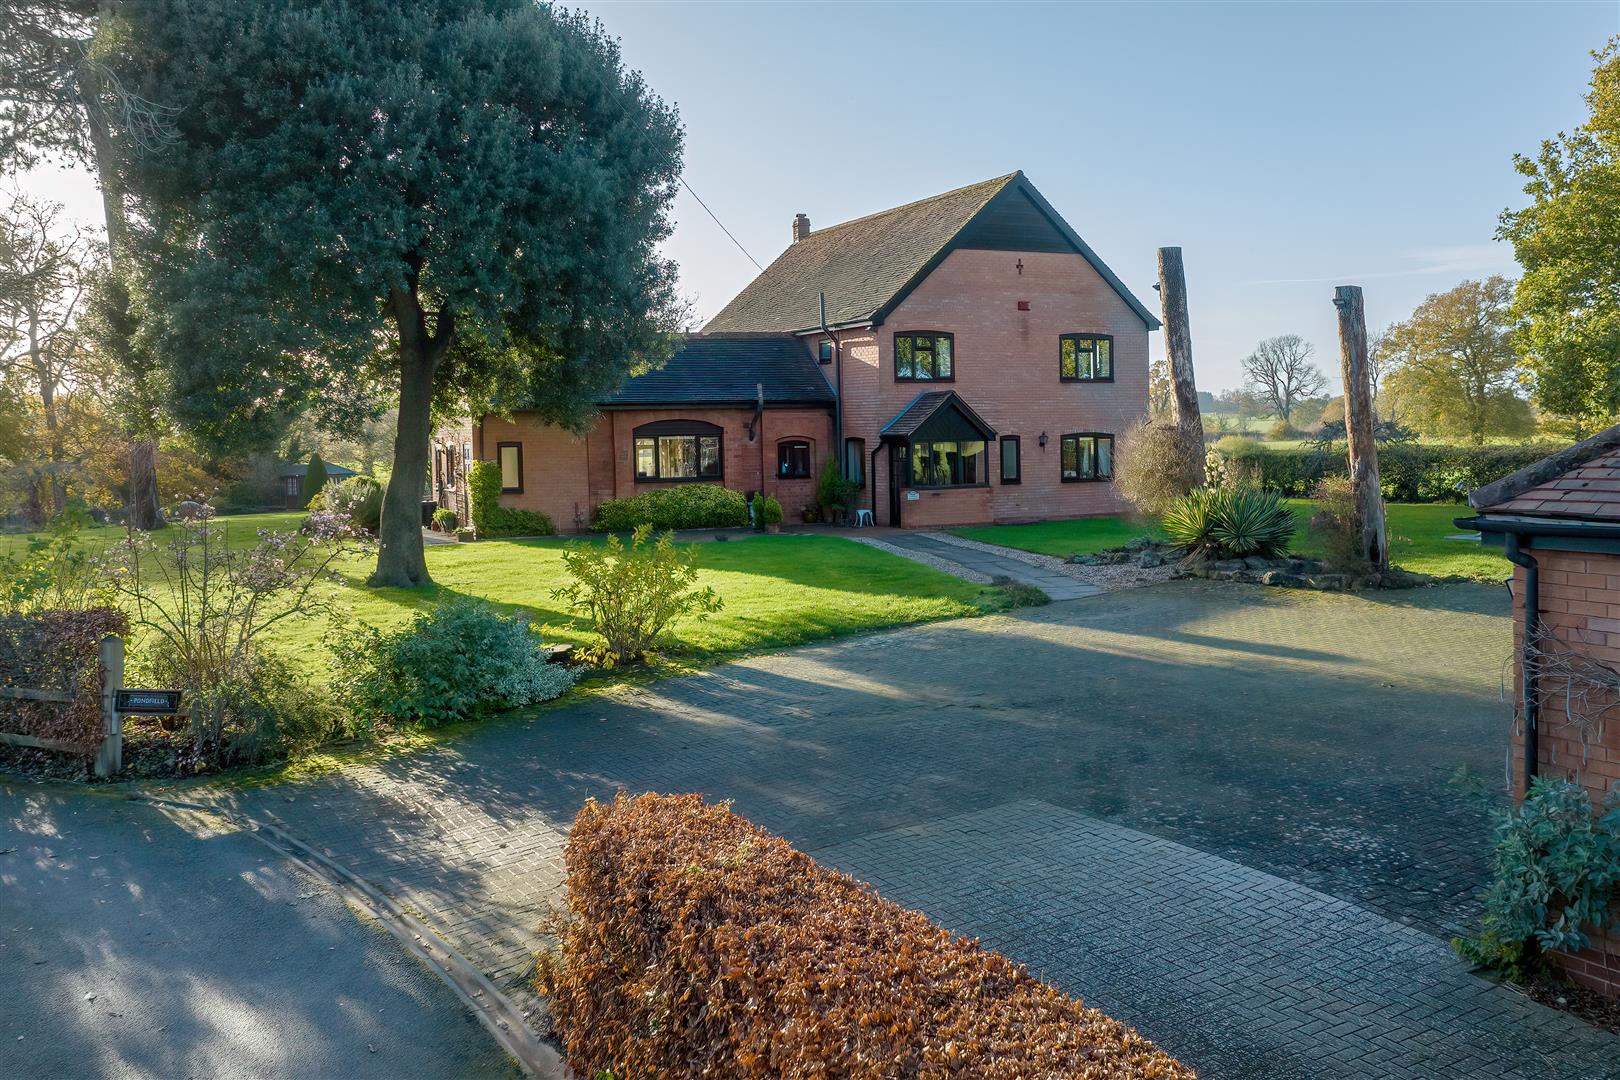 5 bedroom detached house for sale in Chigwell